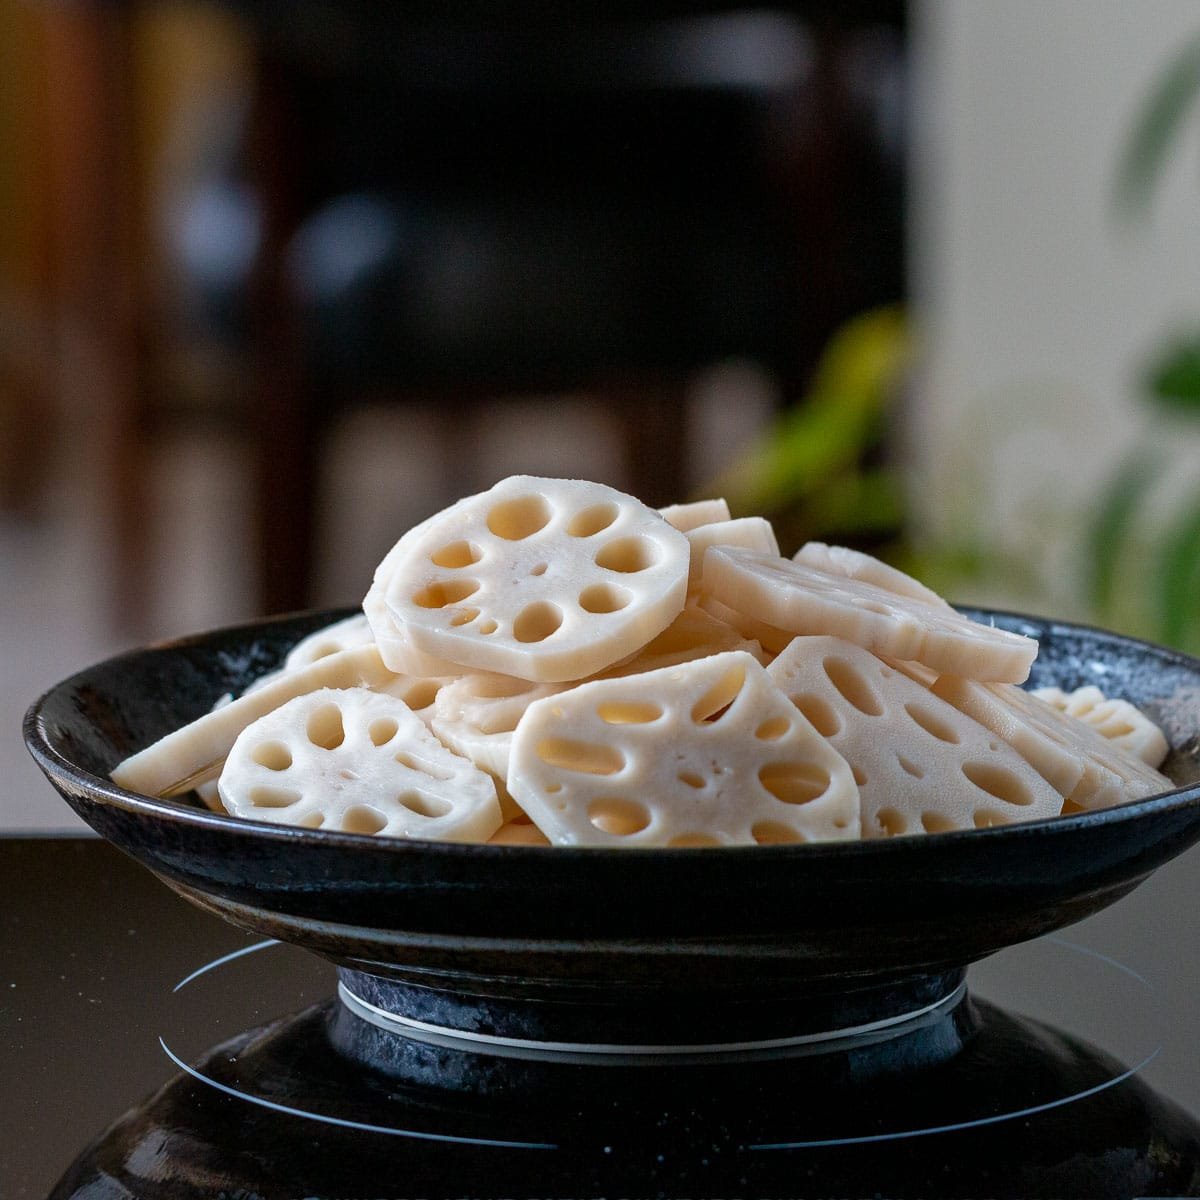 Raw Lotus roots sliced and in a black bowl.